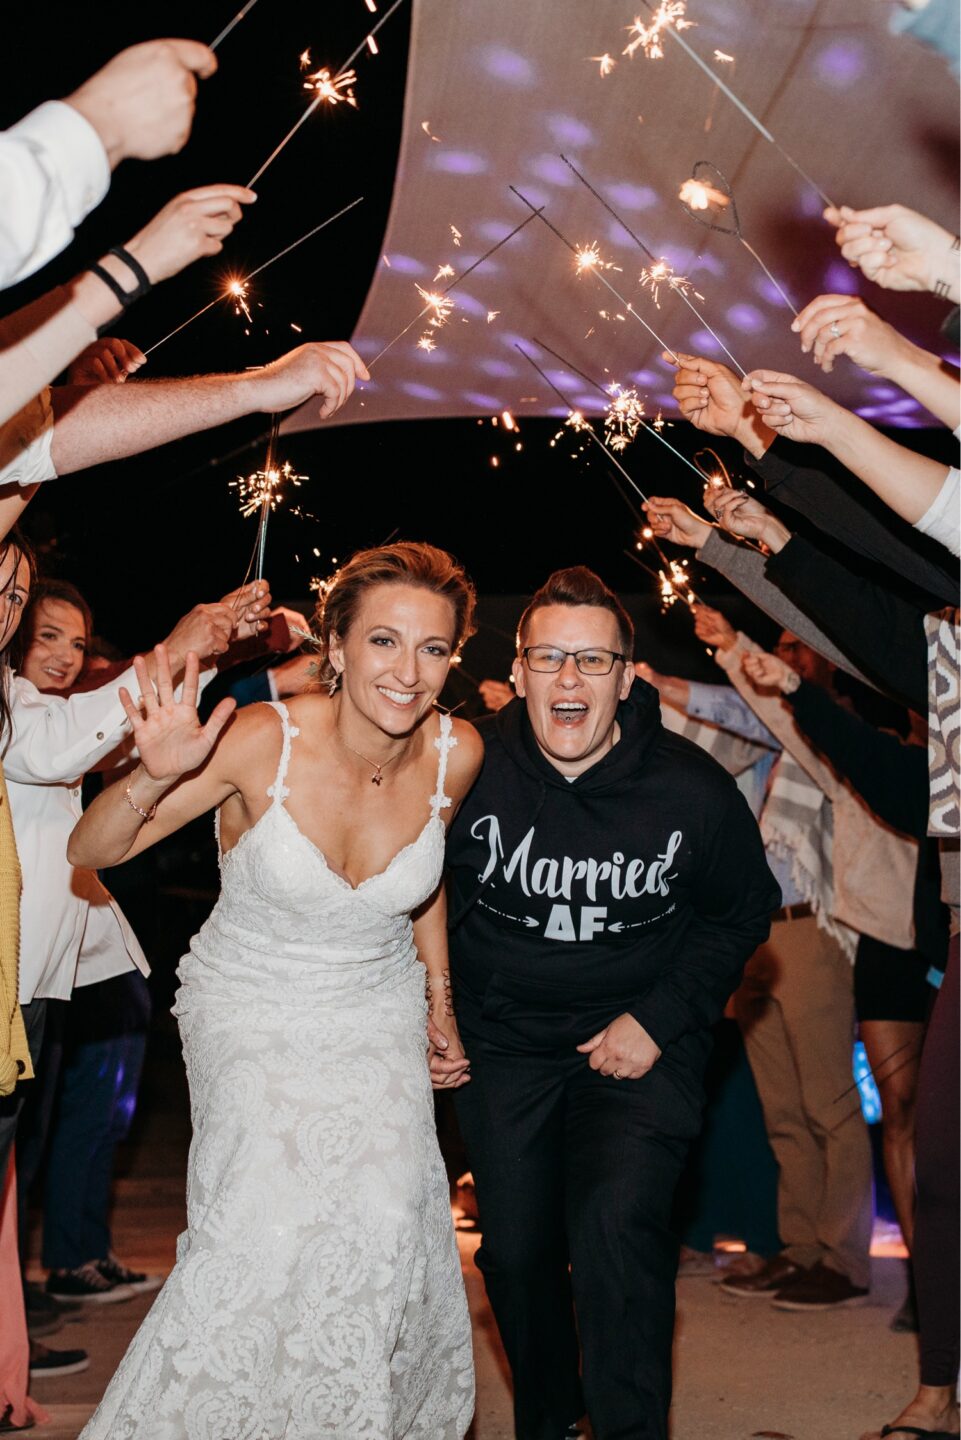 Brides walk out of their wedding reception under sparklers, one in a white lace wedding dress and the other in a sweatshirt that says "Married AF". Liz Koston Photography. 